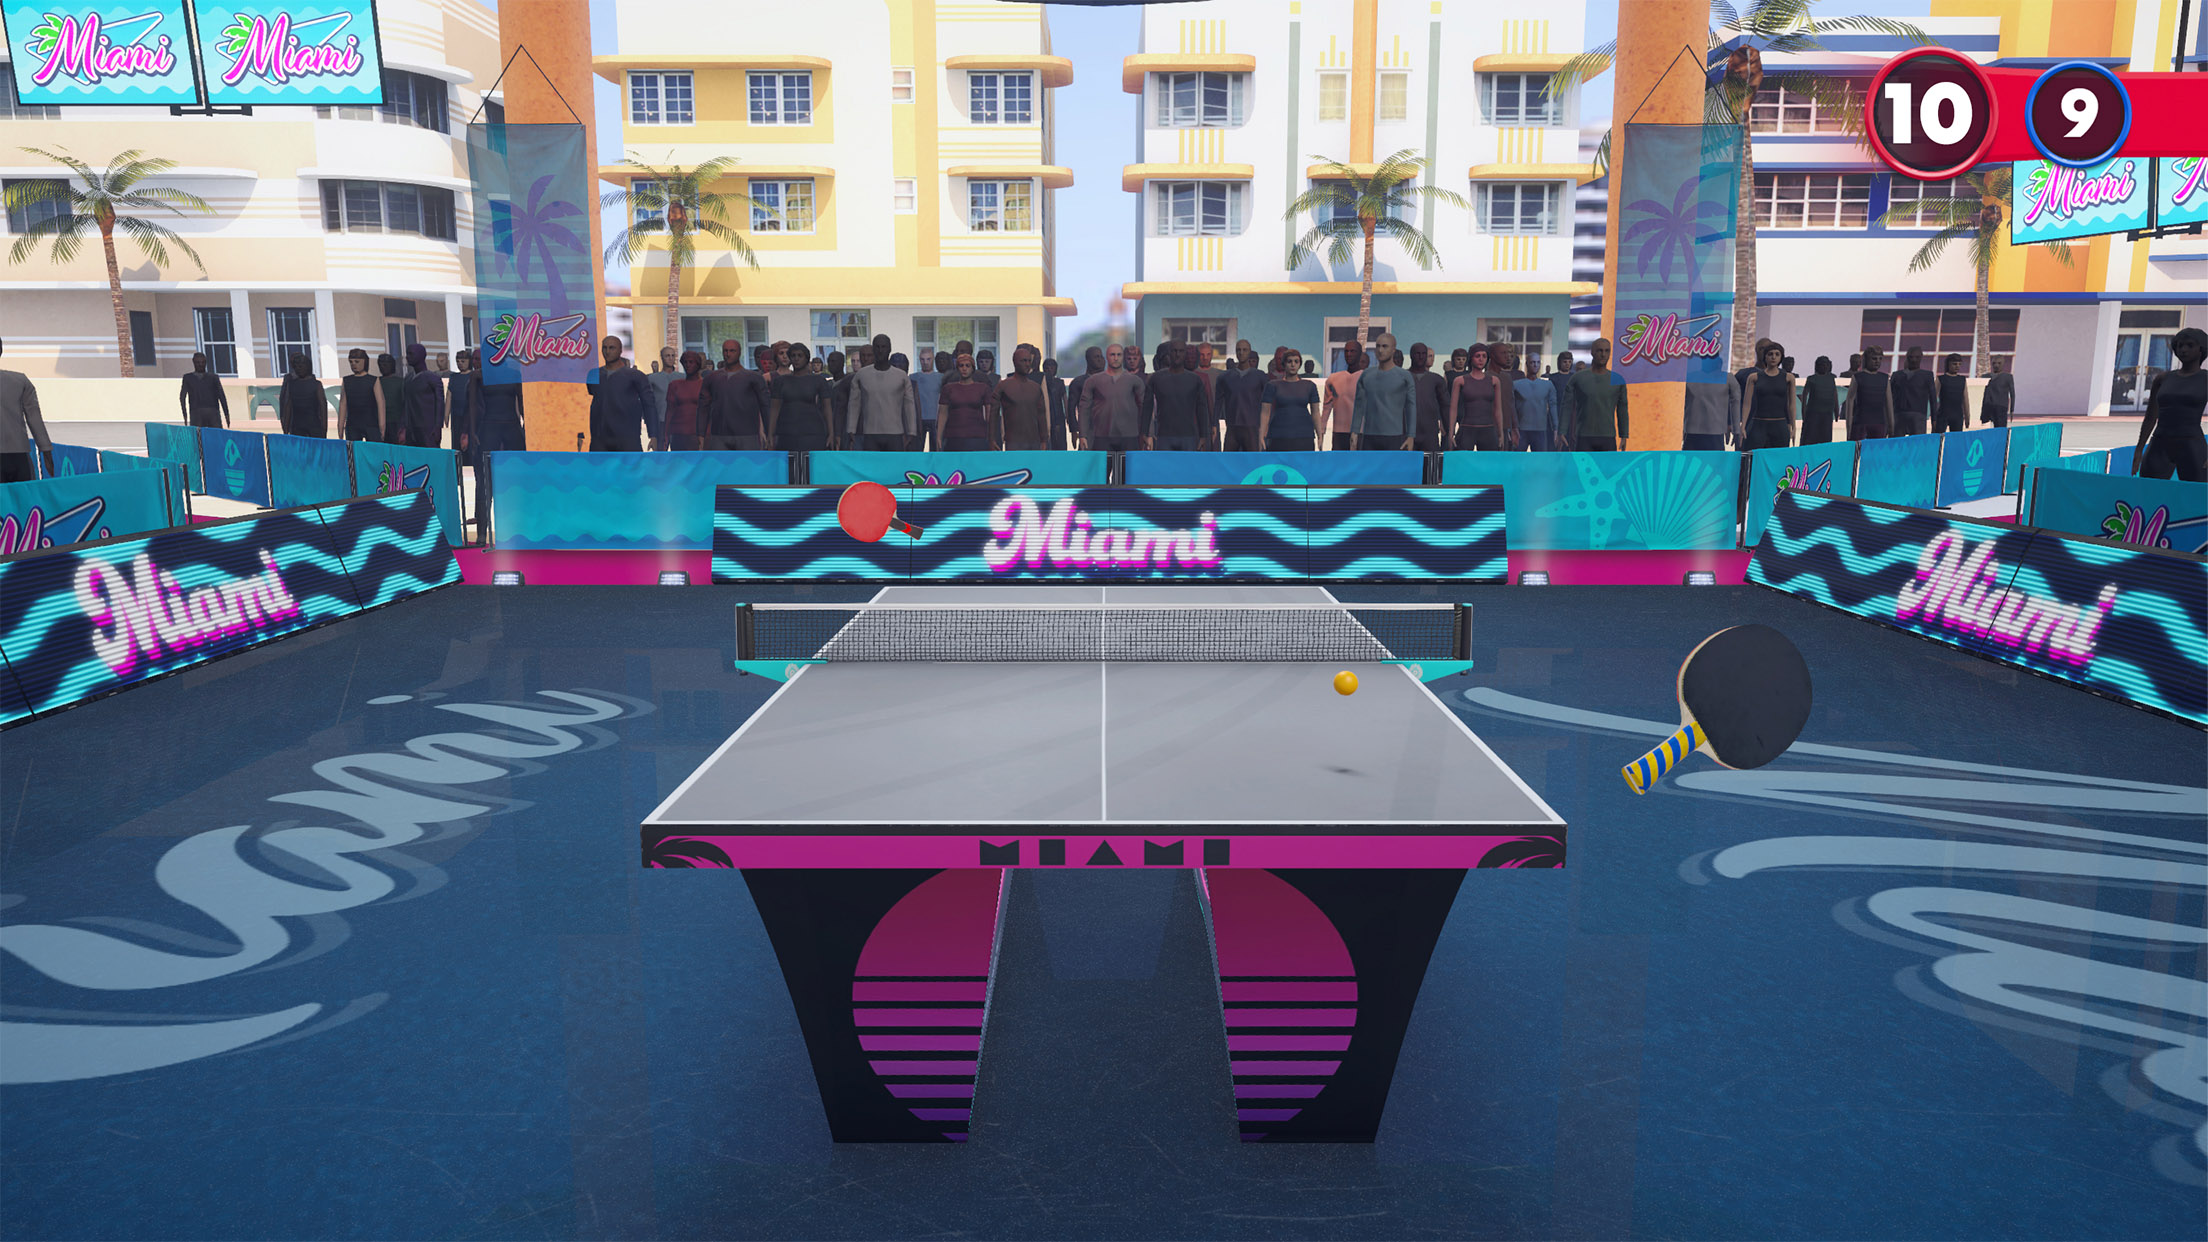 Ping Pong Fury by MOTIX